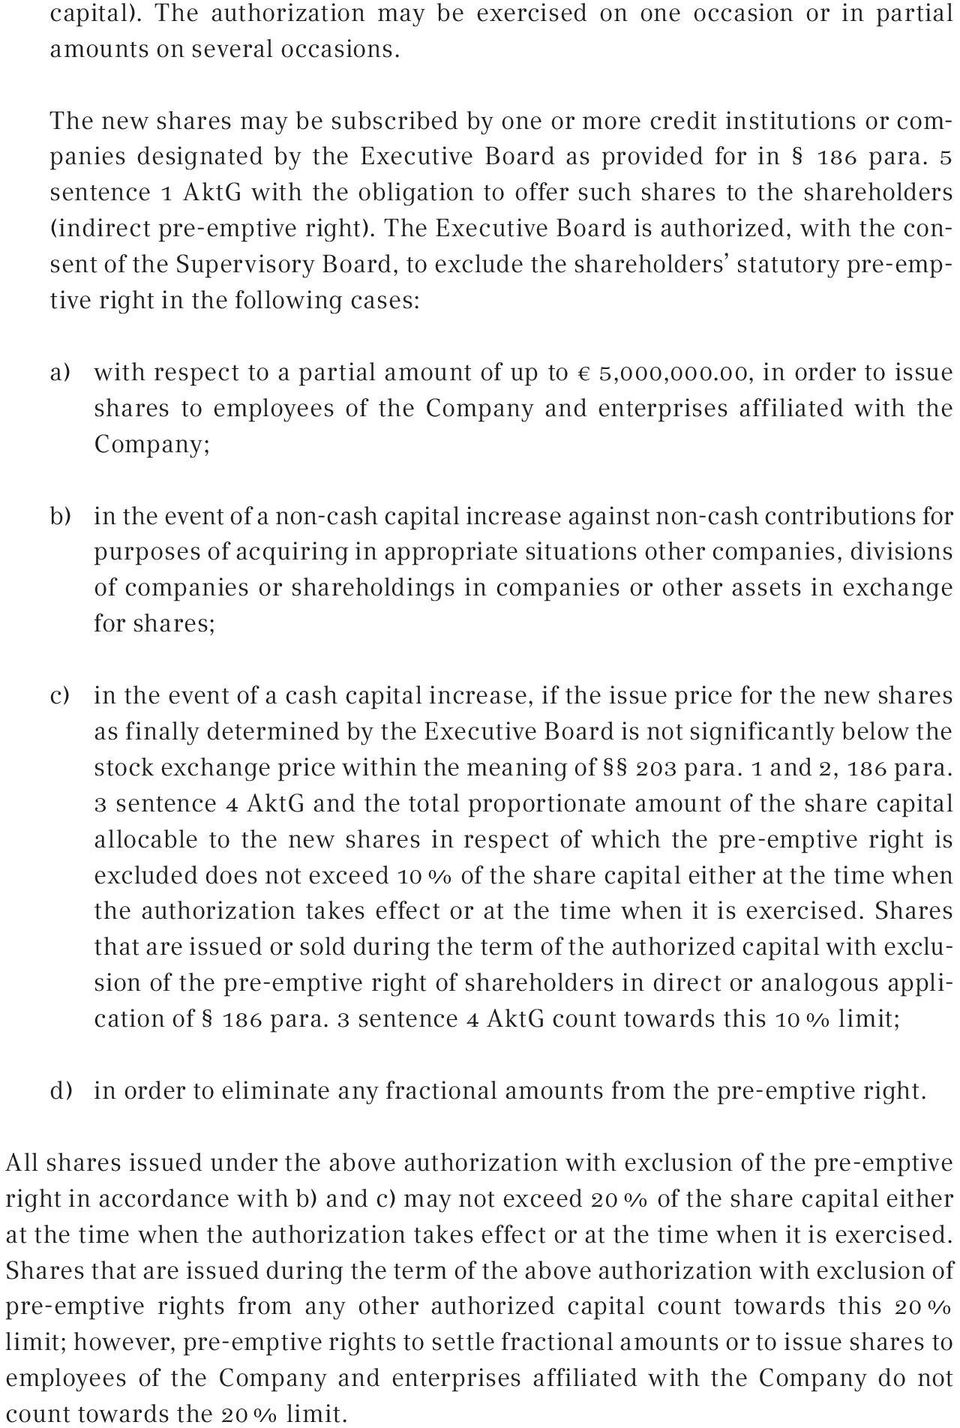 5 sentence 1 AktG with the obligation to offer such shares to the shareholders (indirect pre-emptive right).